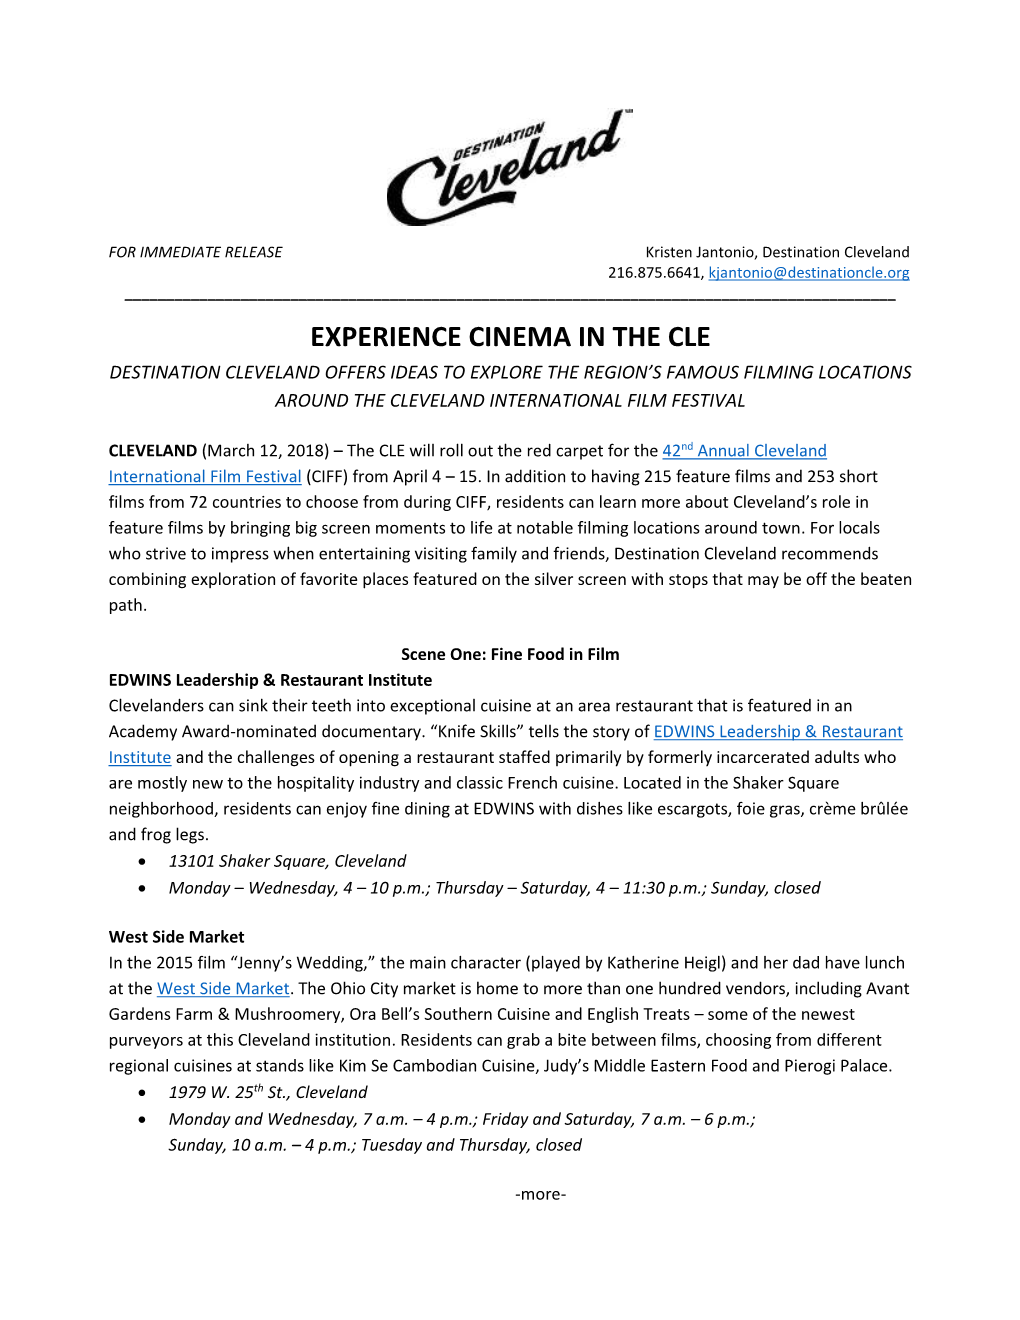 Experience Cinema in the Cle Destination Cleveland Offers Ideas to Explore the Region’S Famous Filming Locations Around the Cleveland International Film Festival